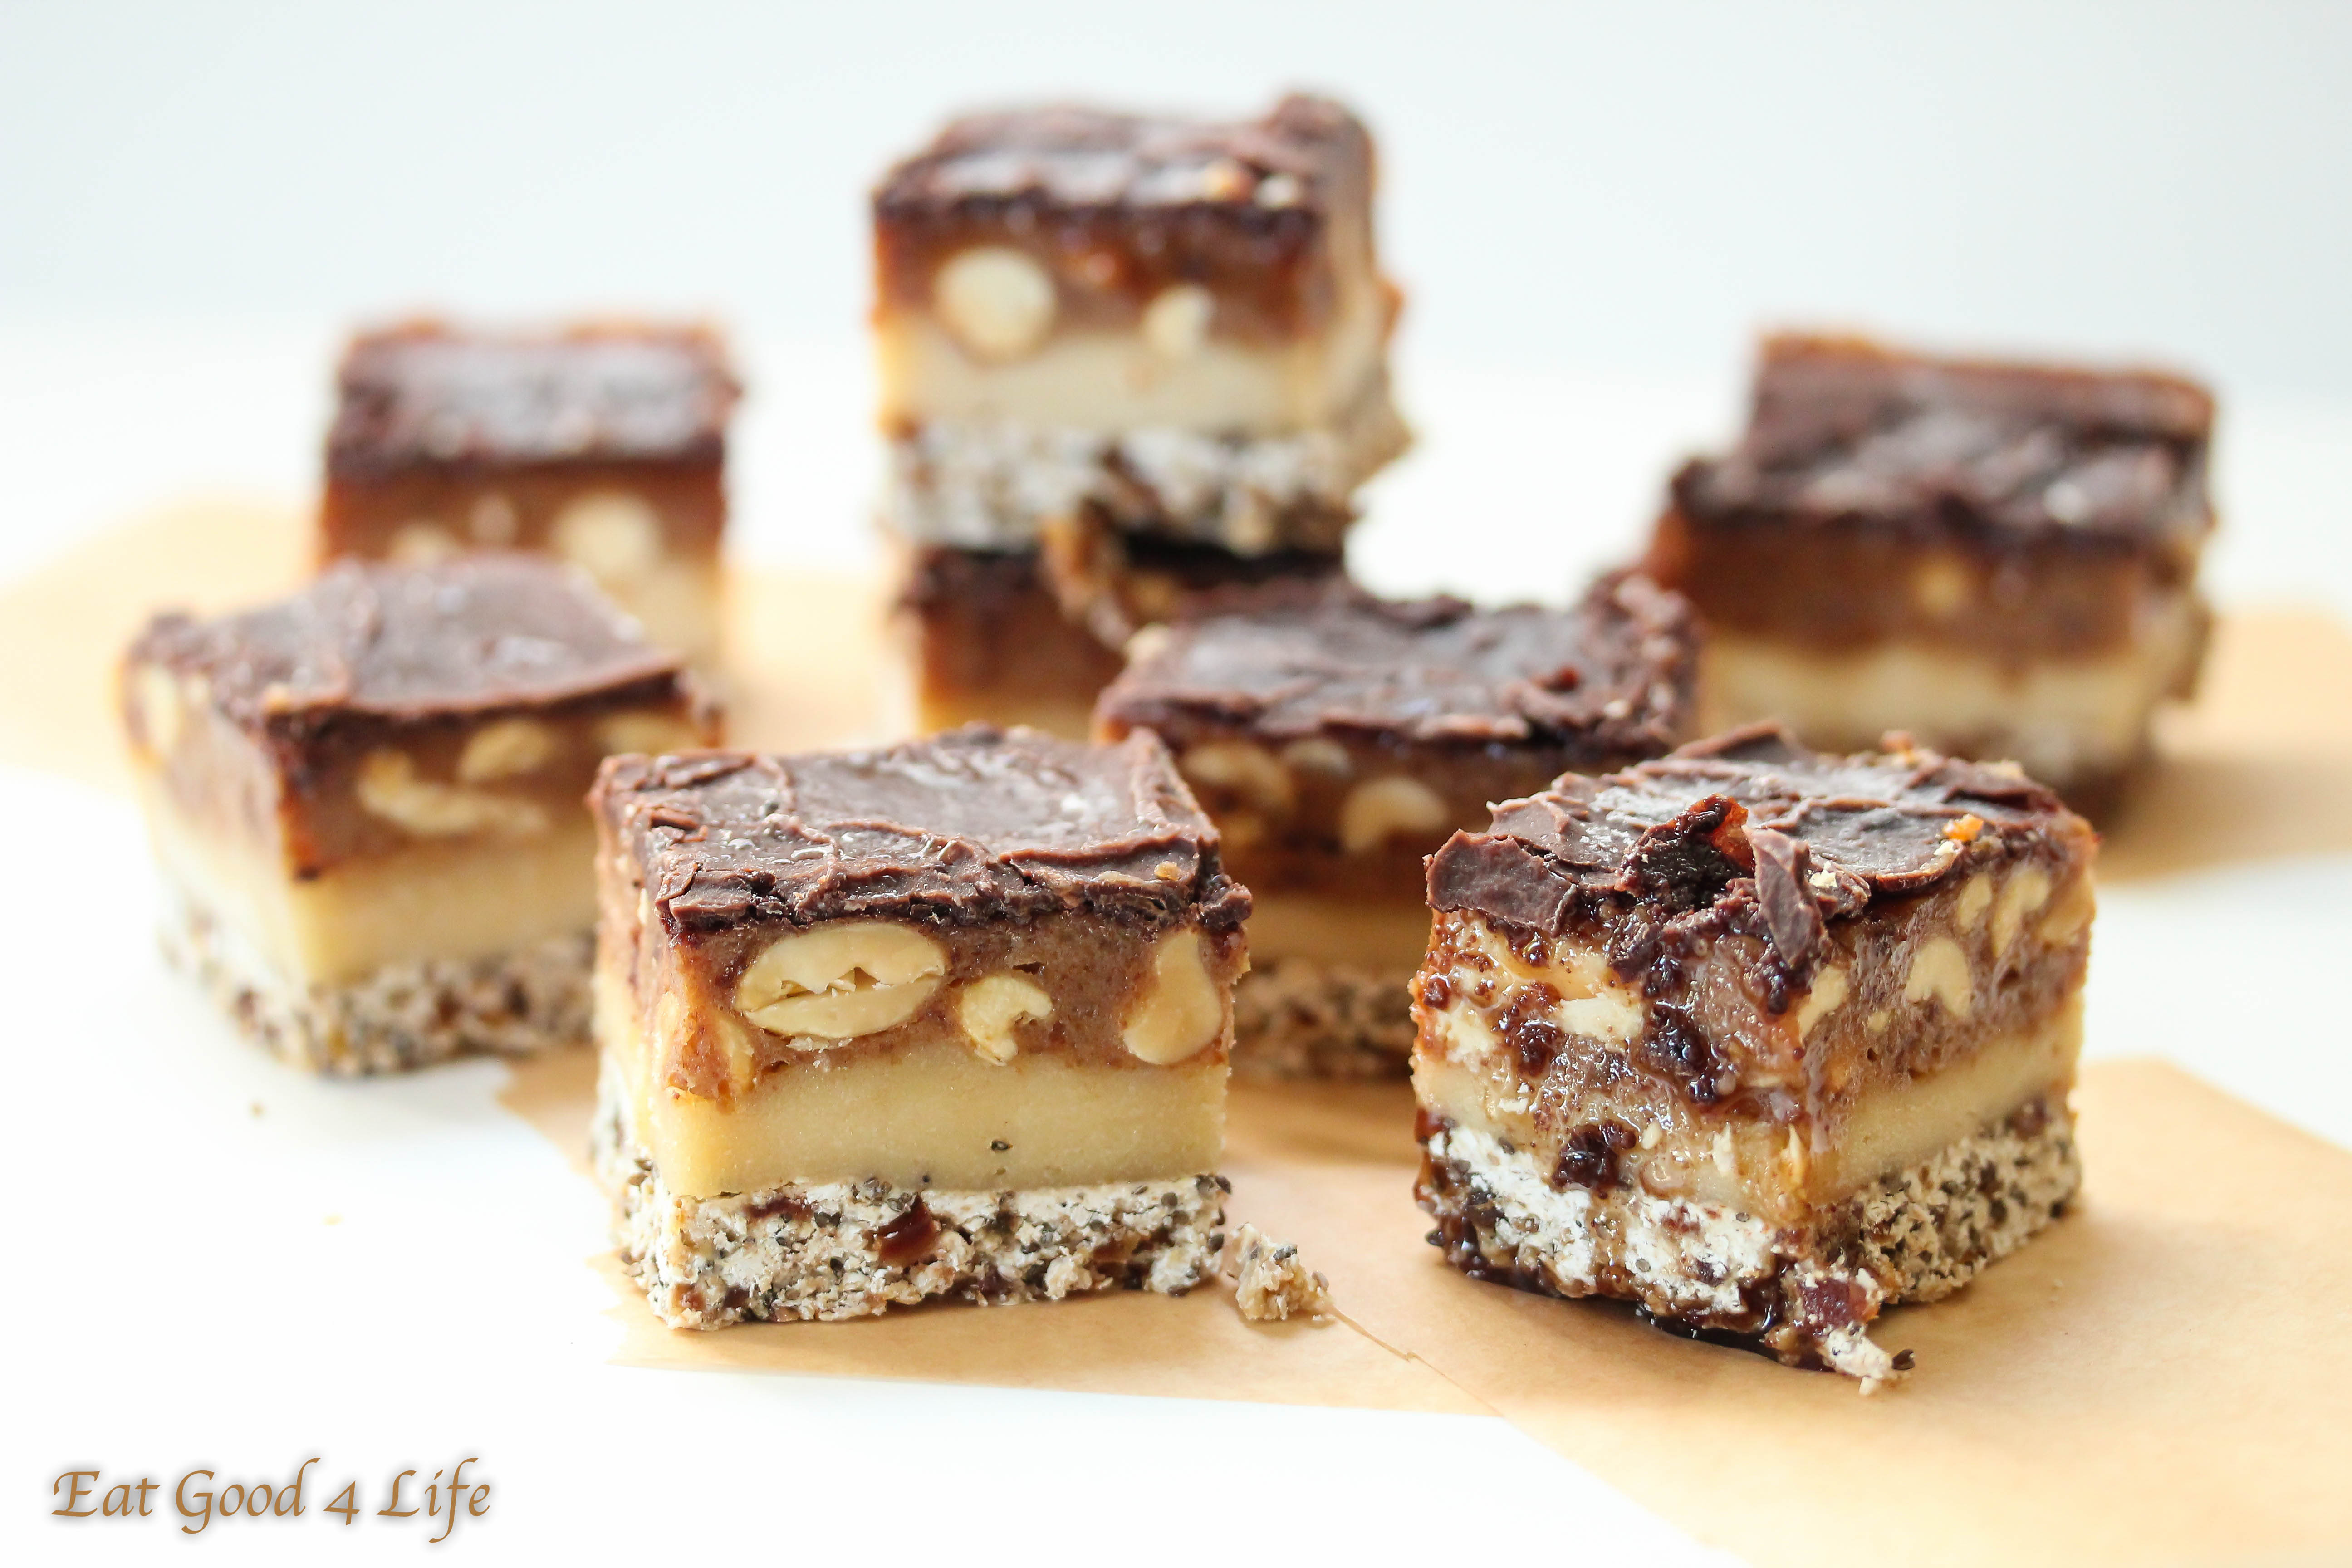 Candy bars- Gluten free and vegan